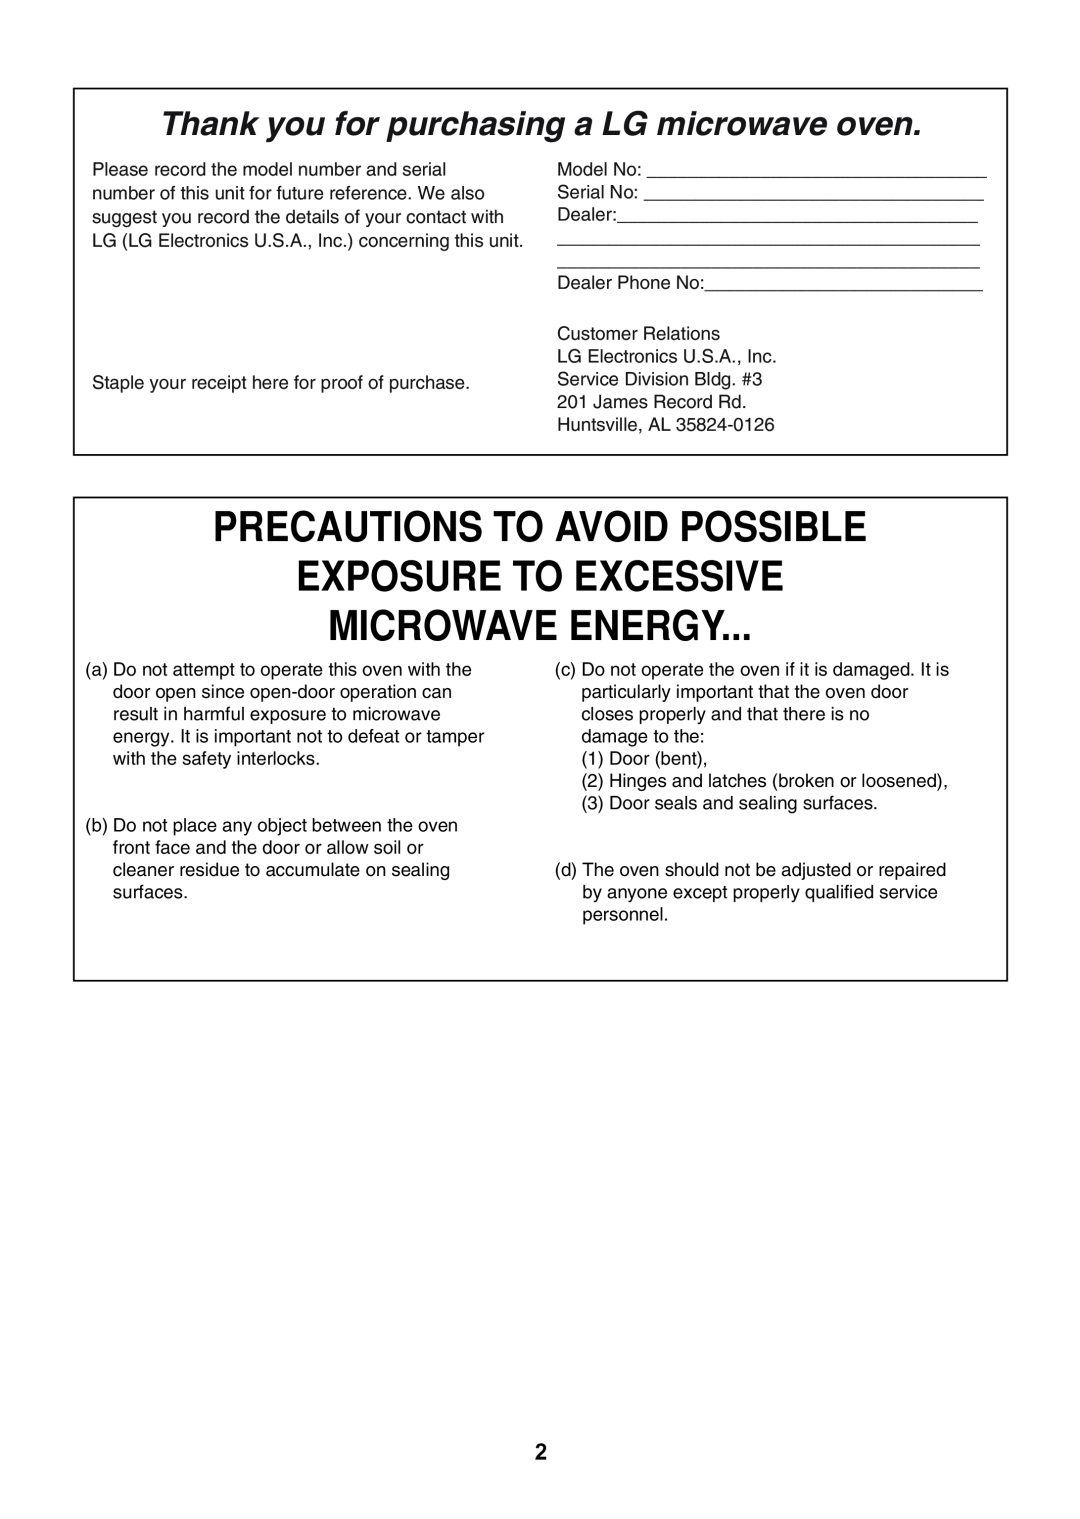 LG Electronics LSMH207ST, LMHM2017W, LMHM2017SB manual Precautions To Avoid Possible Exposure To Excessive Microwave Energy 